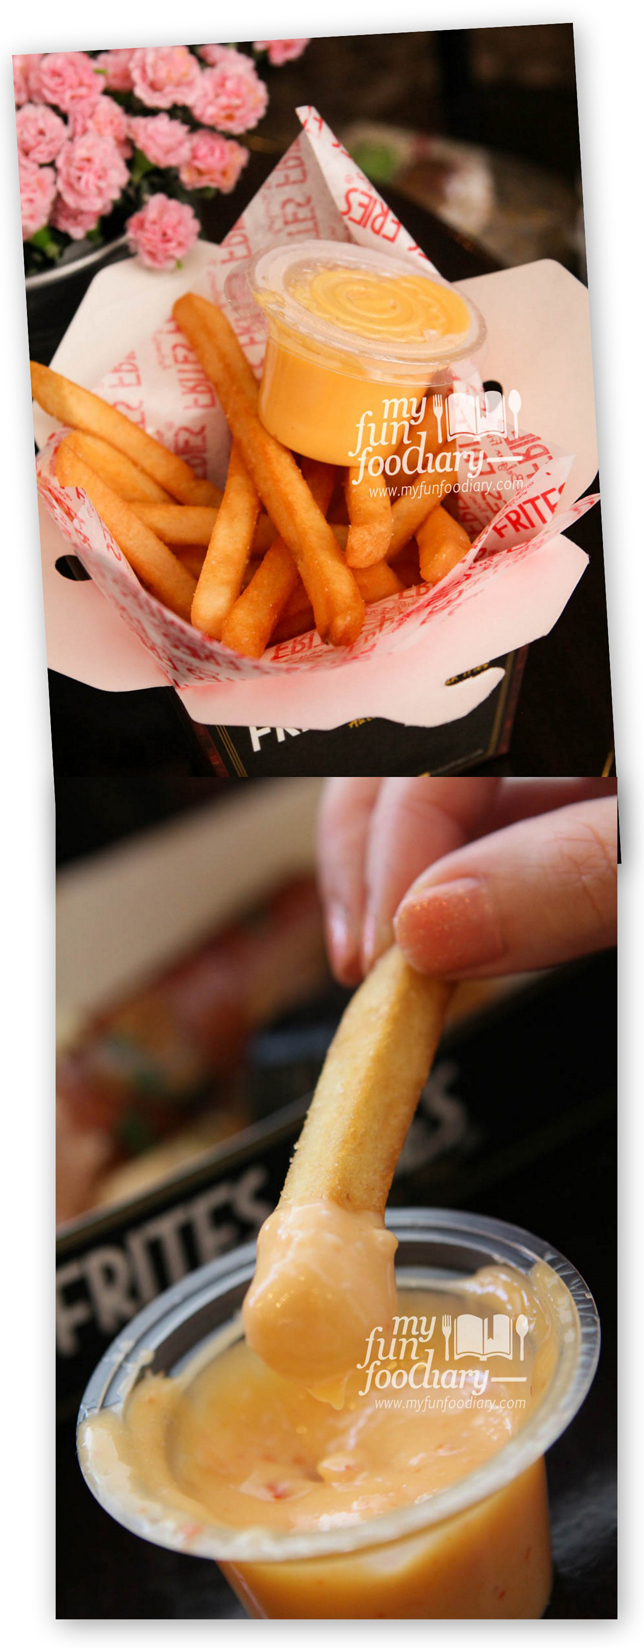 French Fries Frites Fries